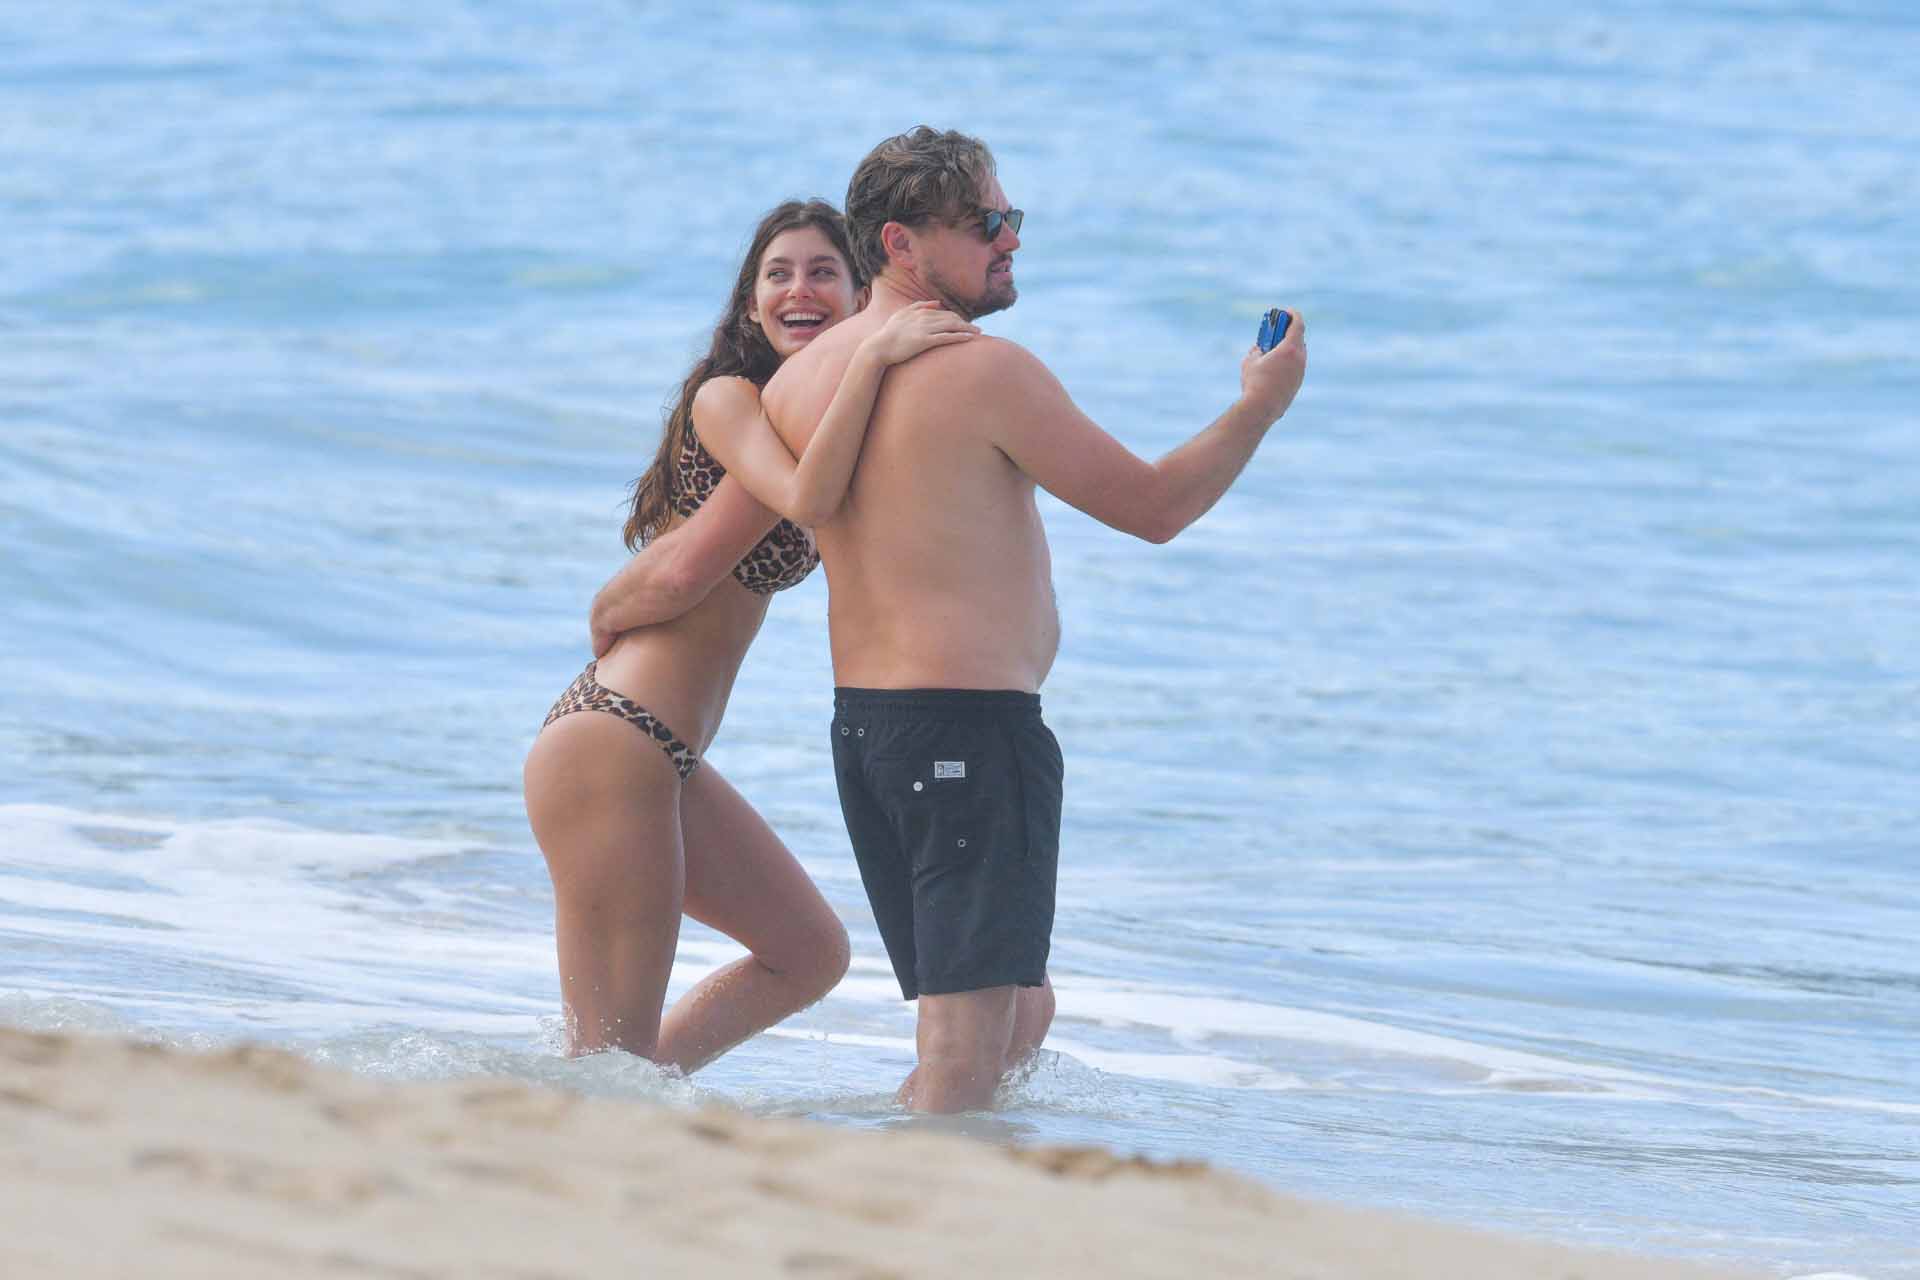 Actor Leonardo Dicaprio and Camila Morrone on holidays in the beach Stbarth 31/12/2019